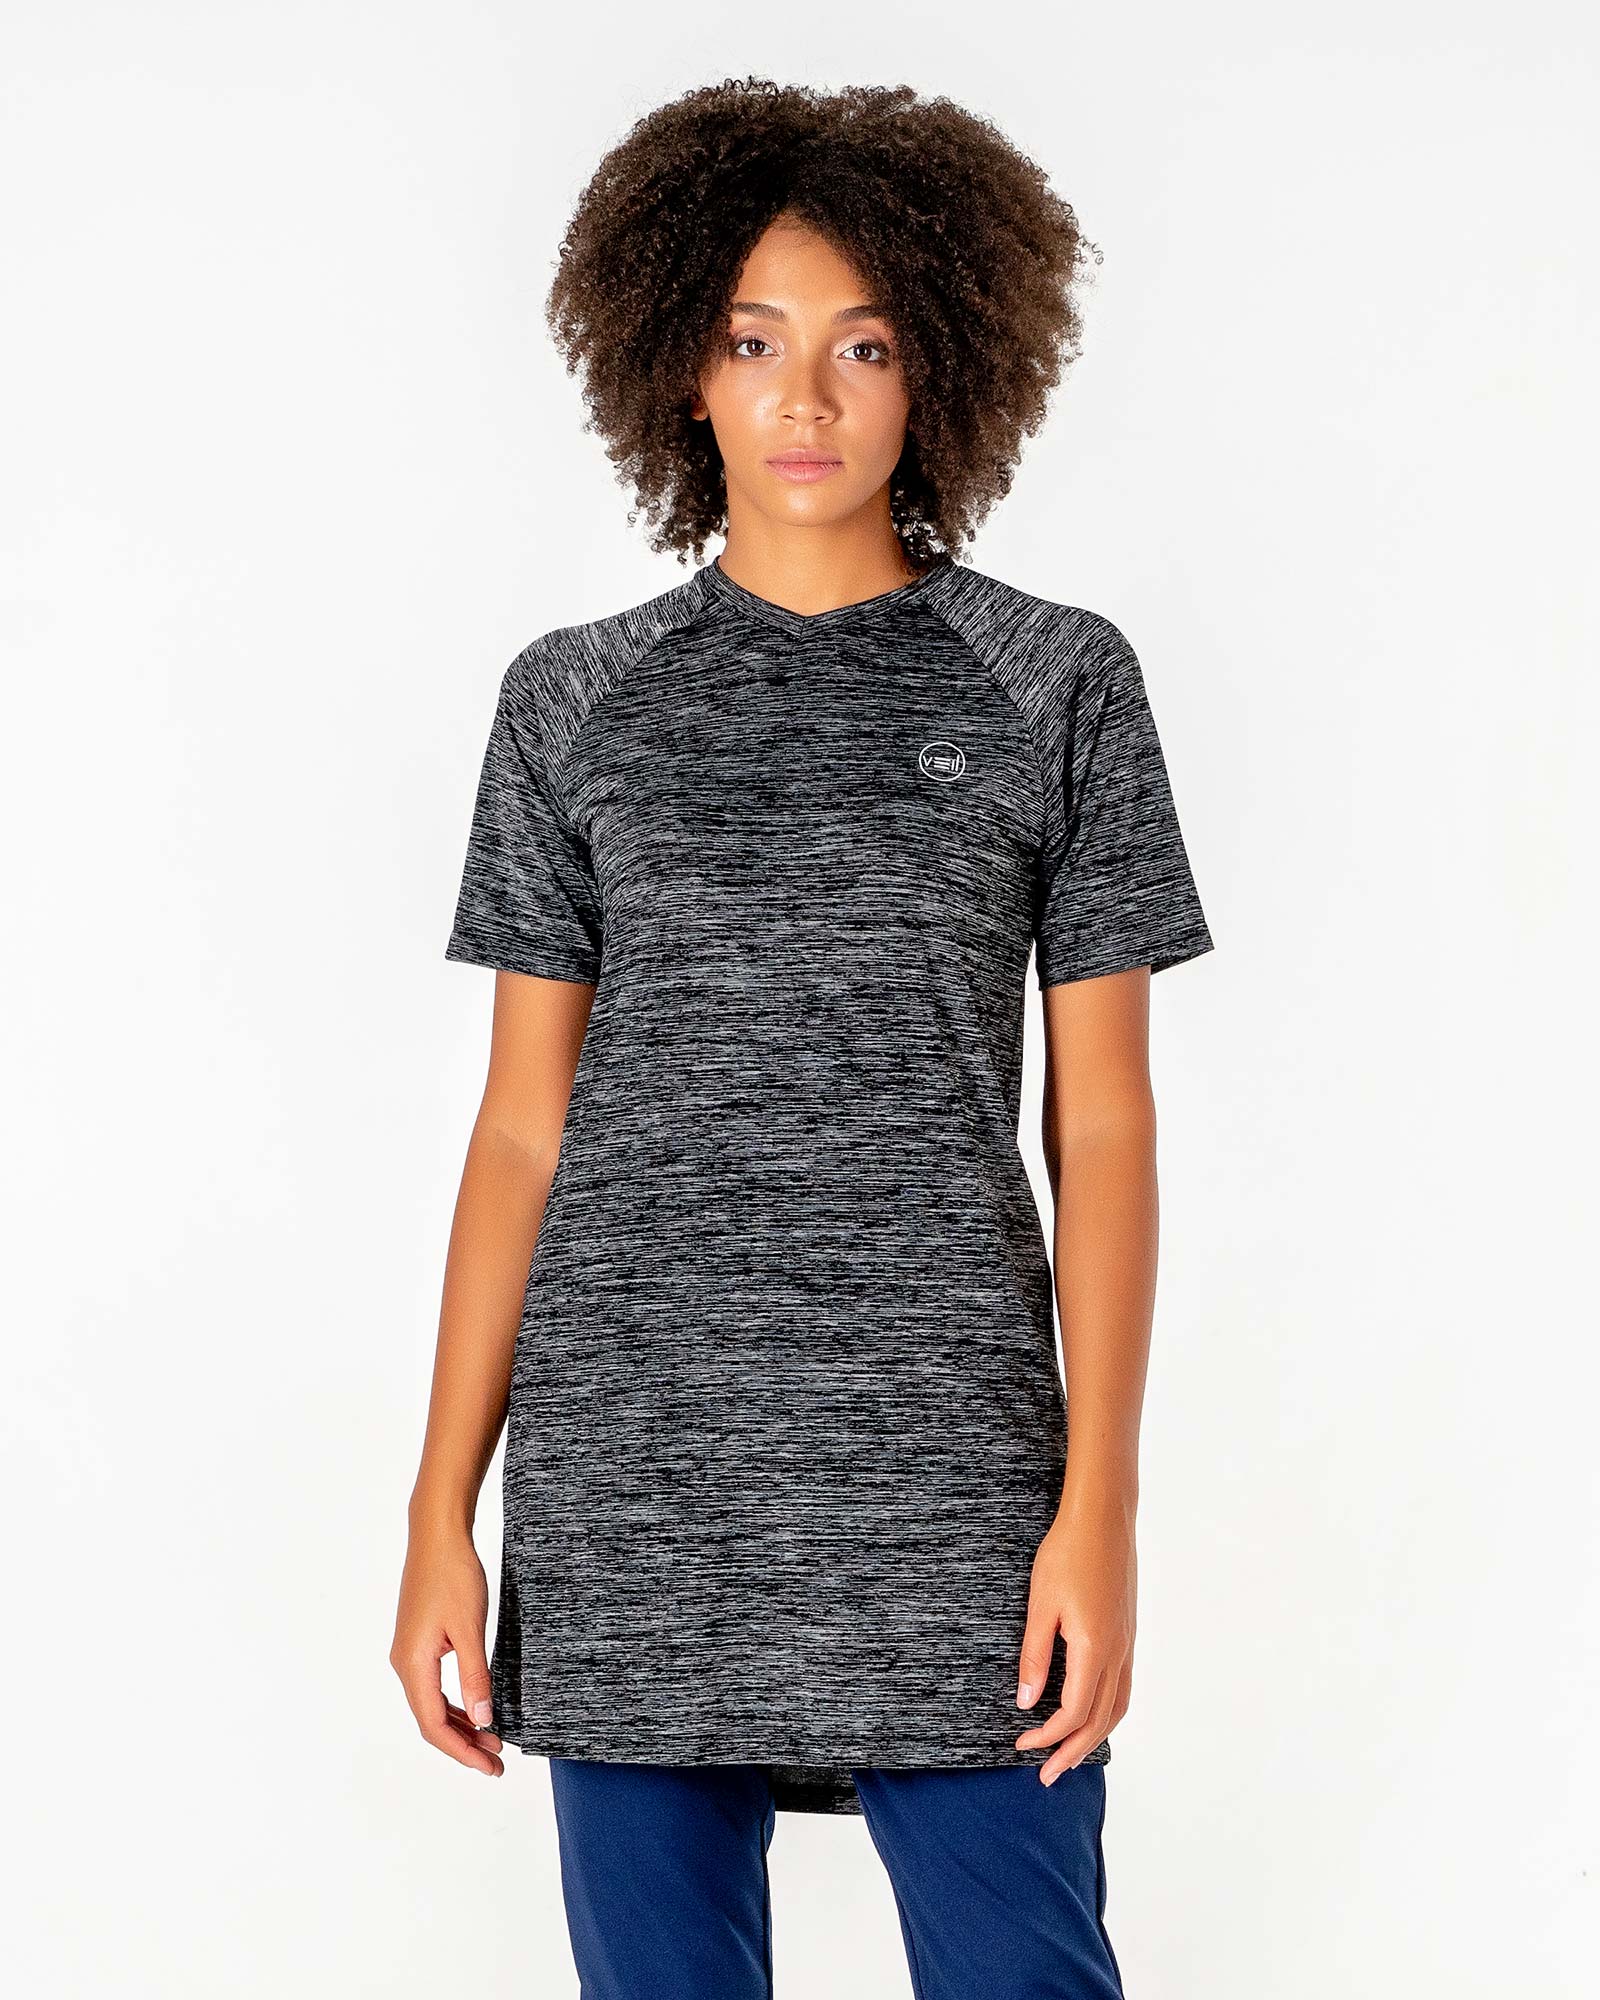 Connect T-Shirt Dress in Black by Veil Garments. Modest activewear collection.